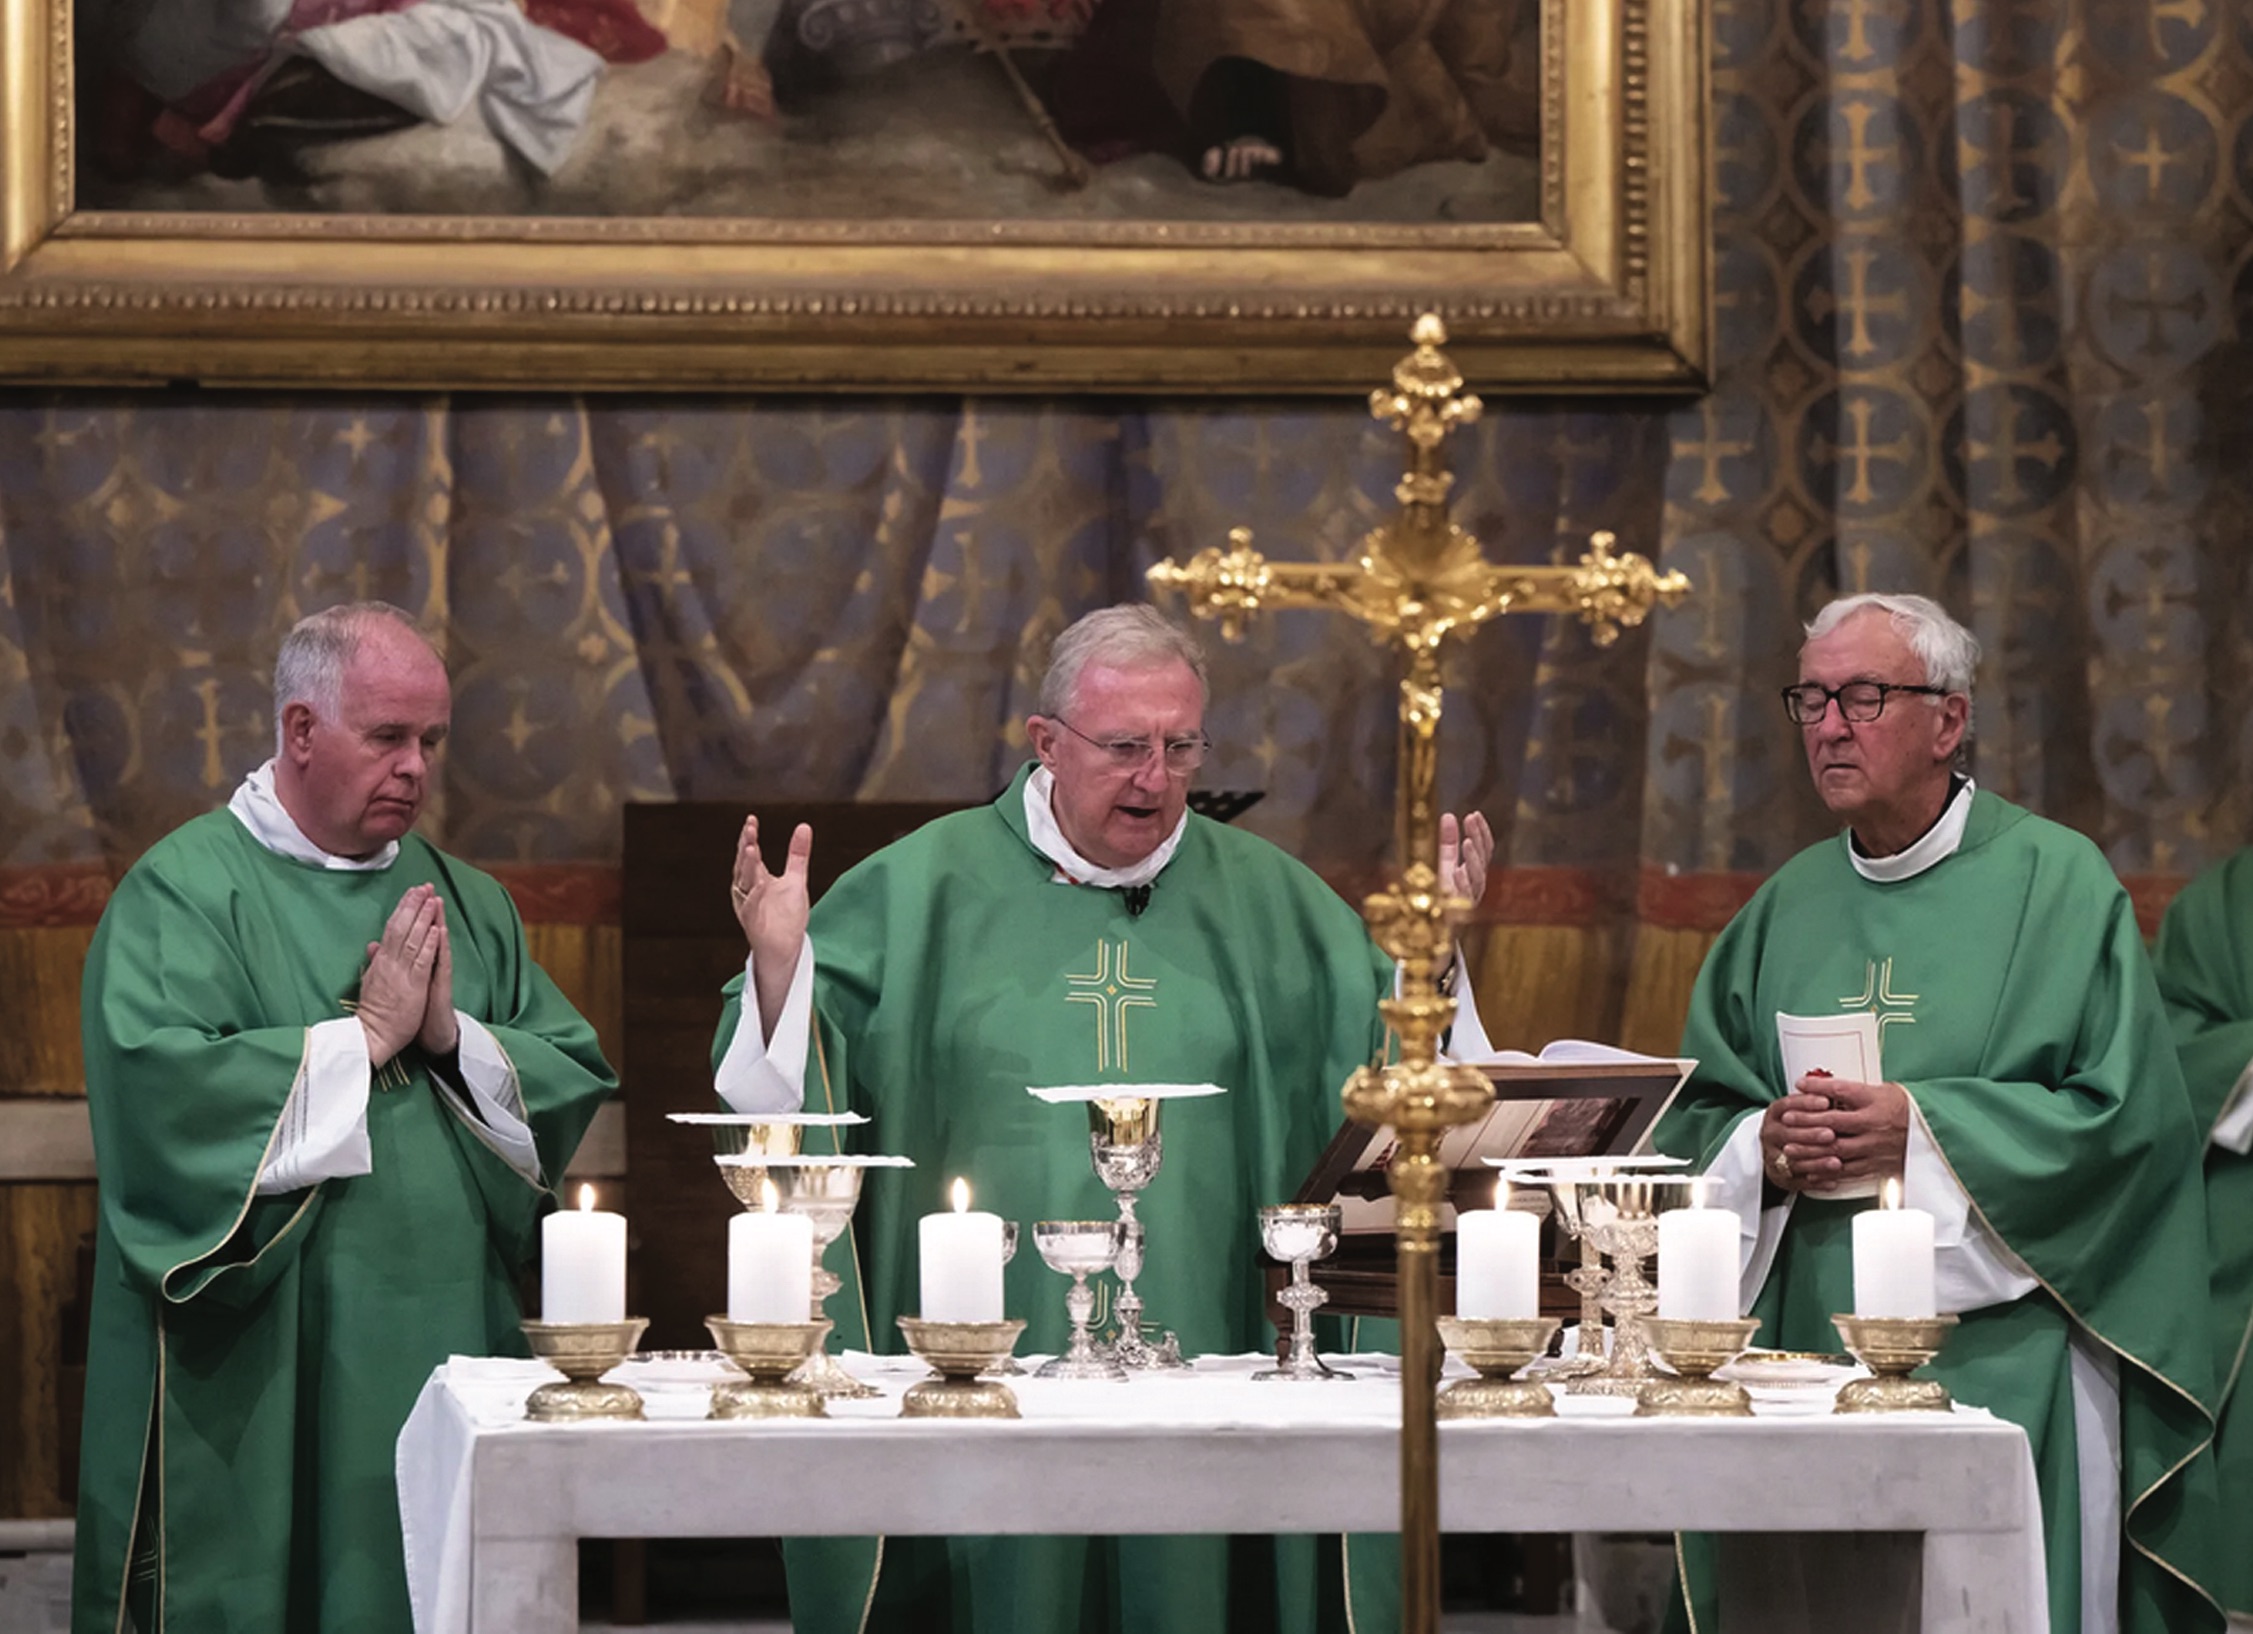 Critics of Cardinal Roche: “There is no evidence for a ‘hermeneutic of rupture'”